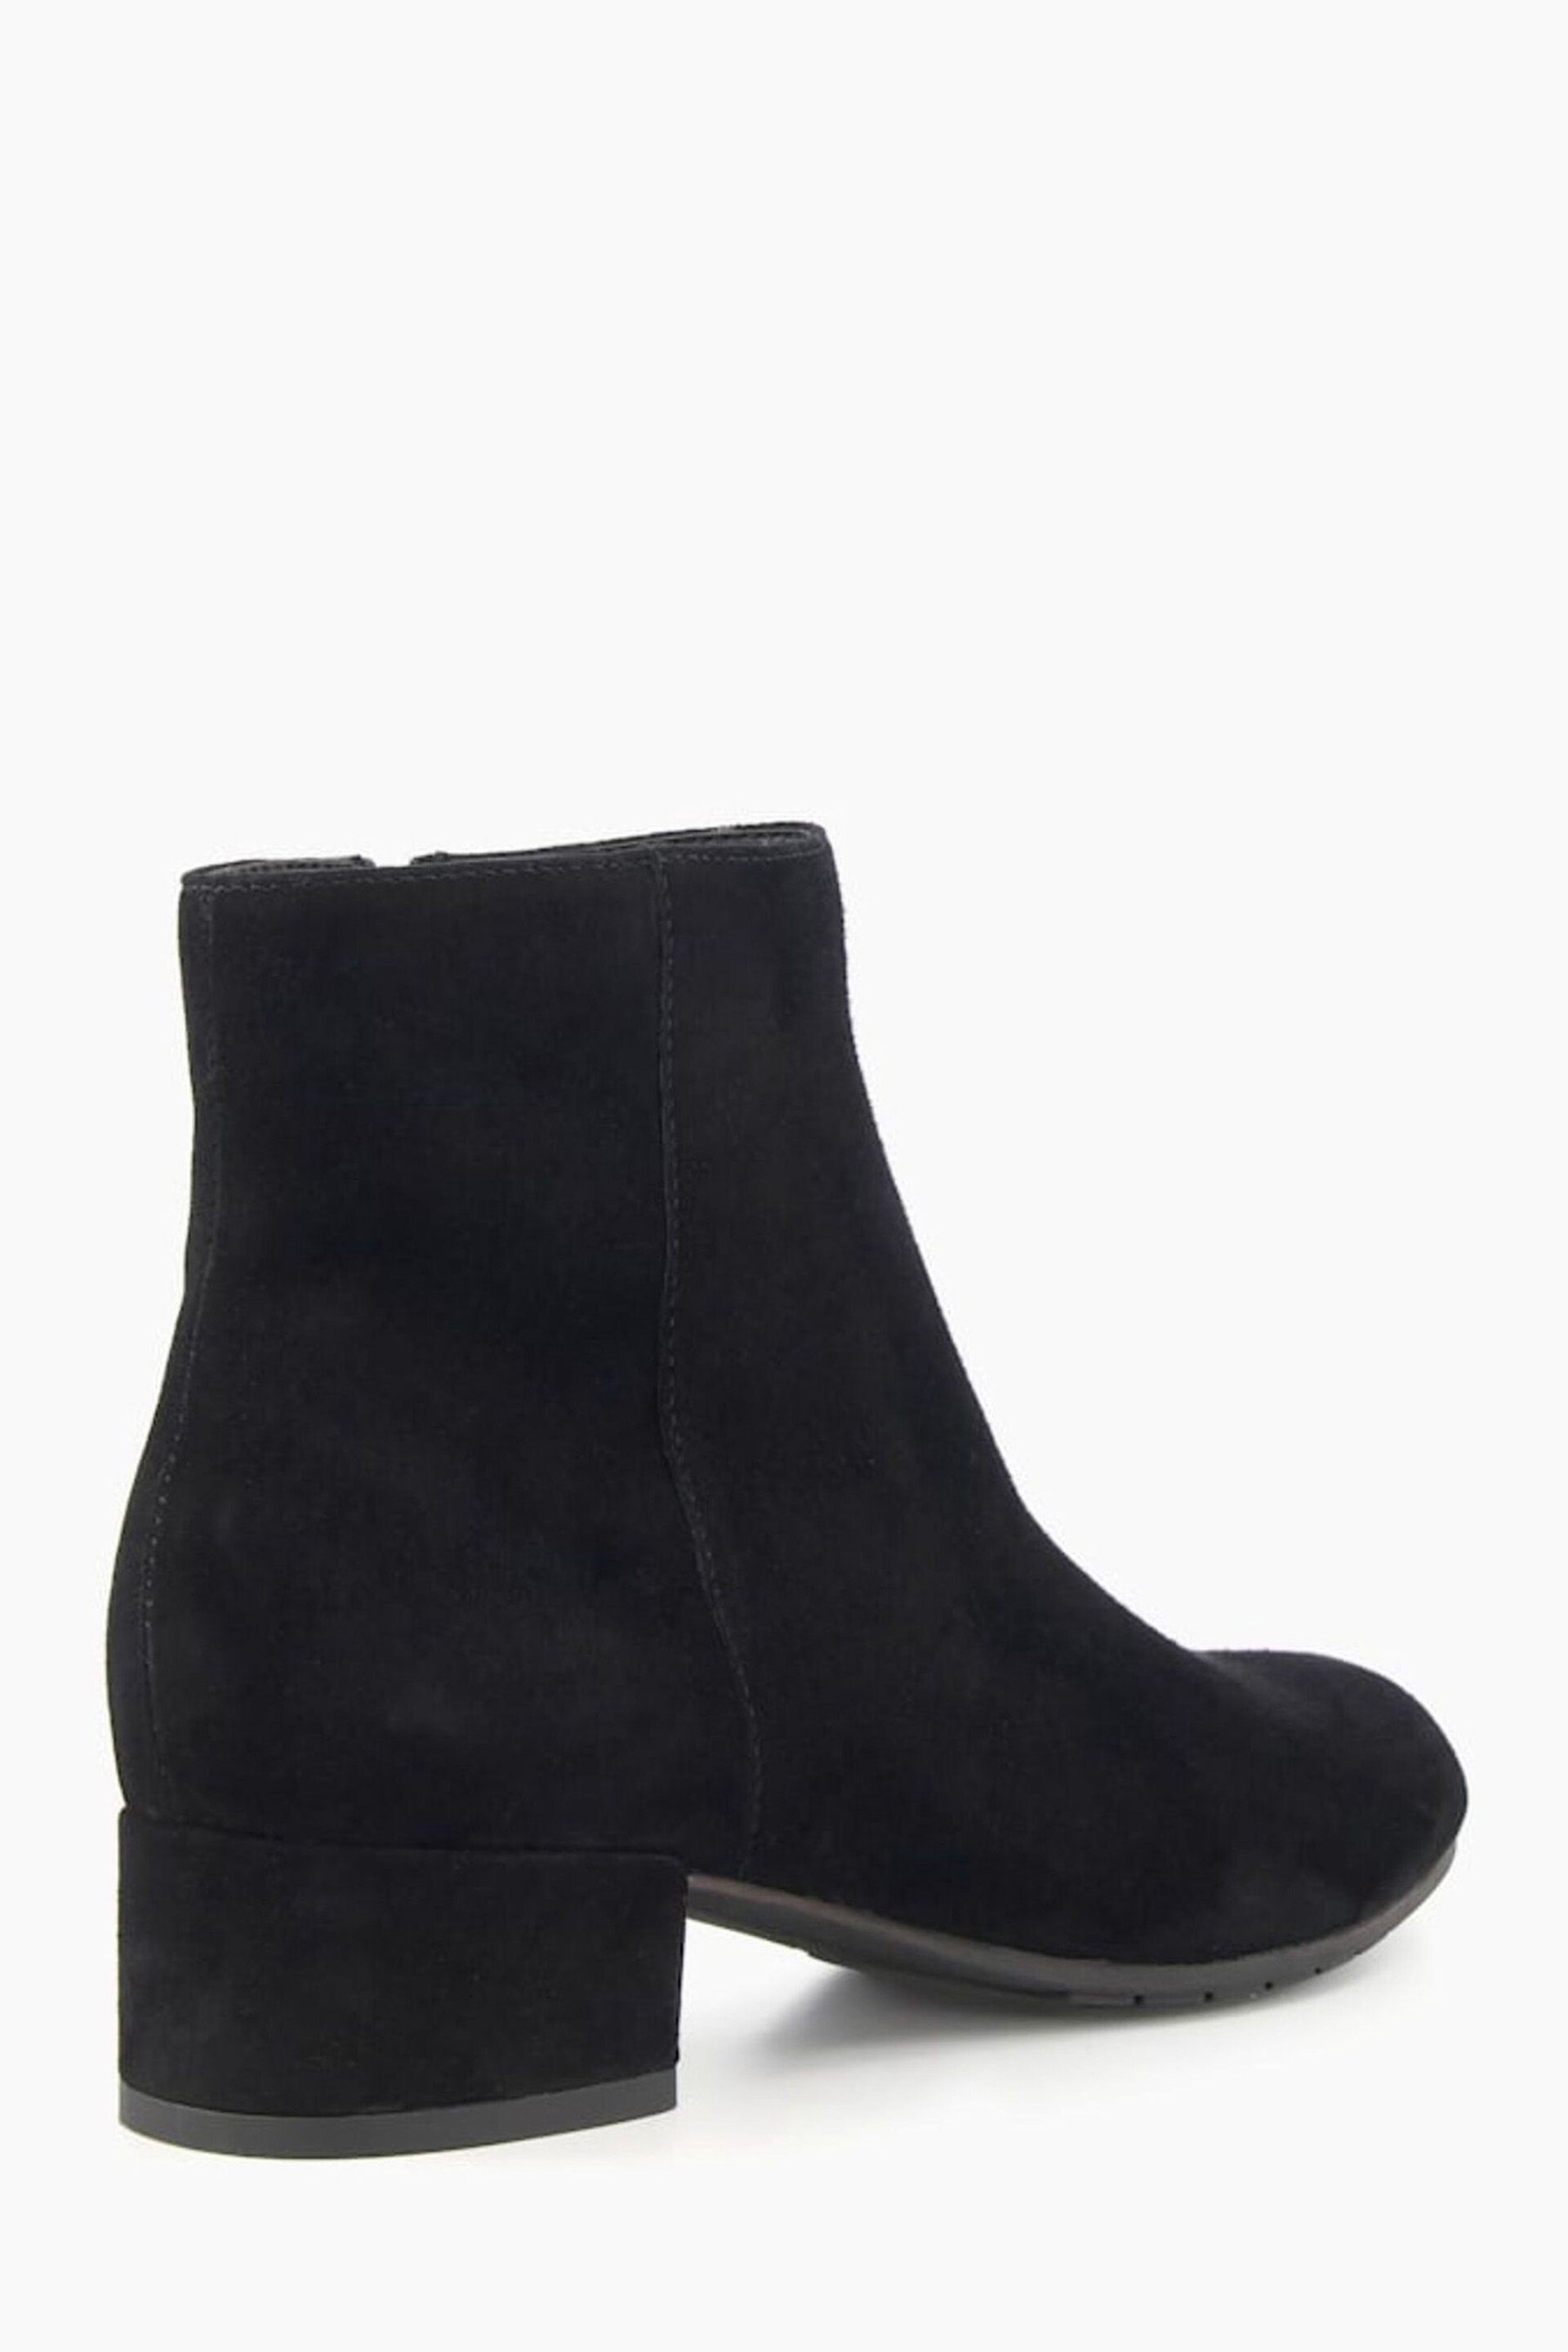 Dune London Black Pippie Smart Low Boots - Image 3 of 5